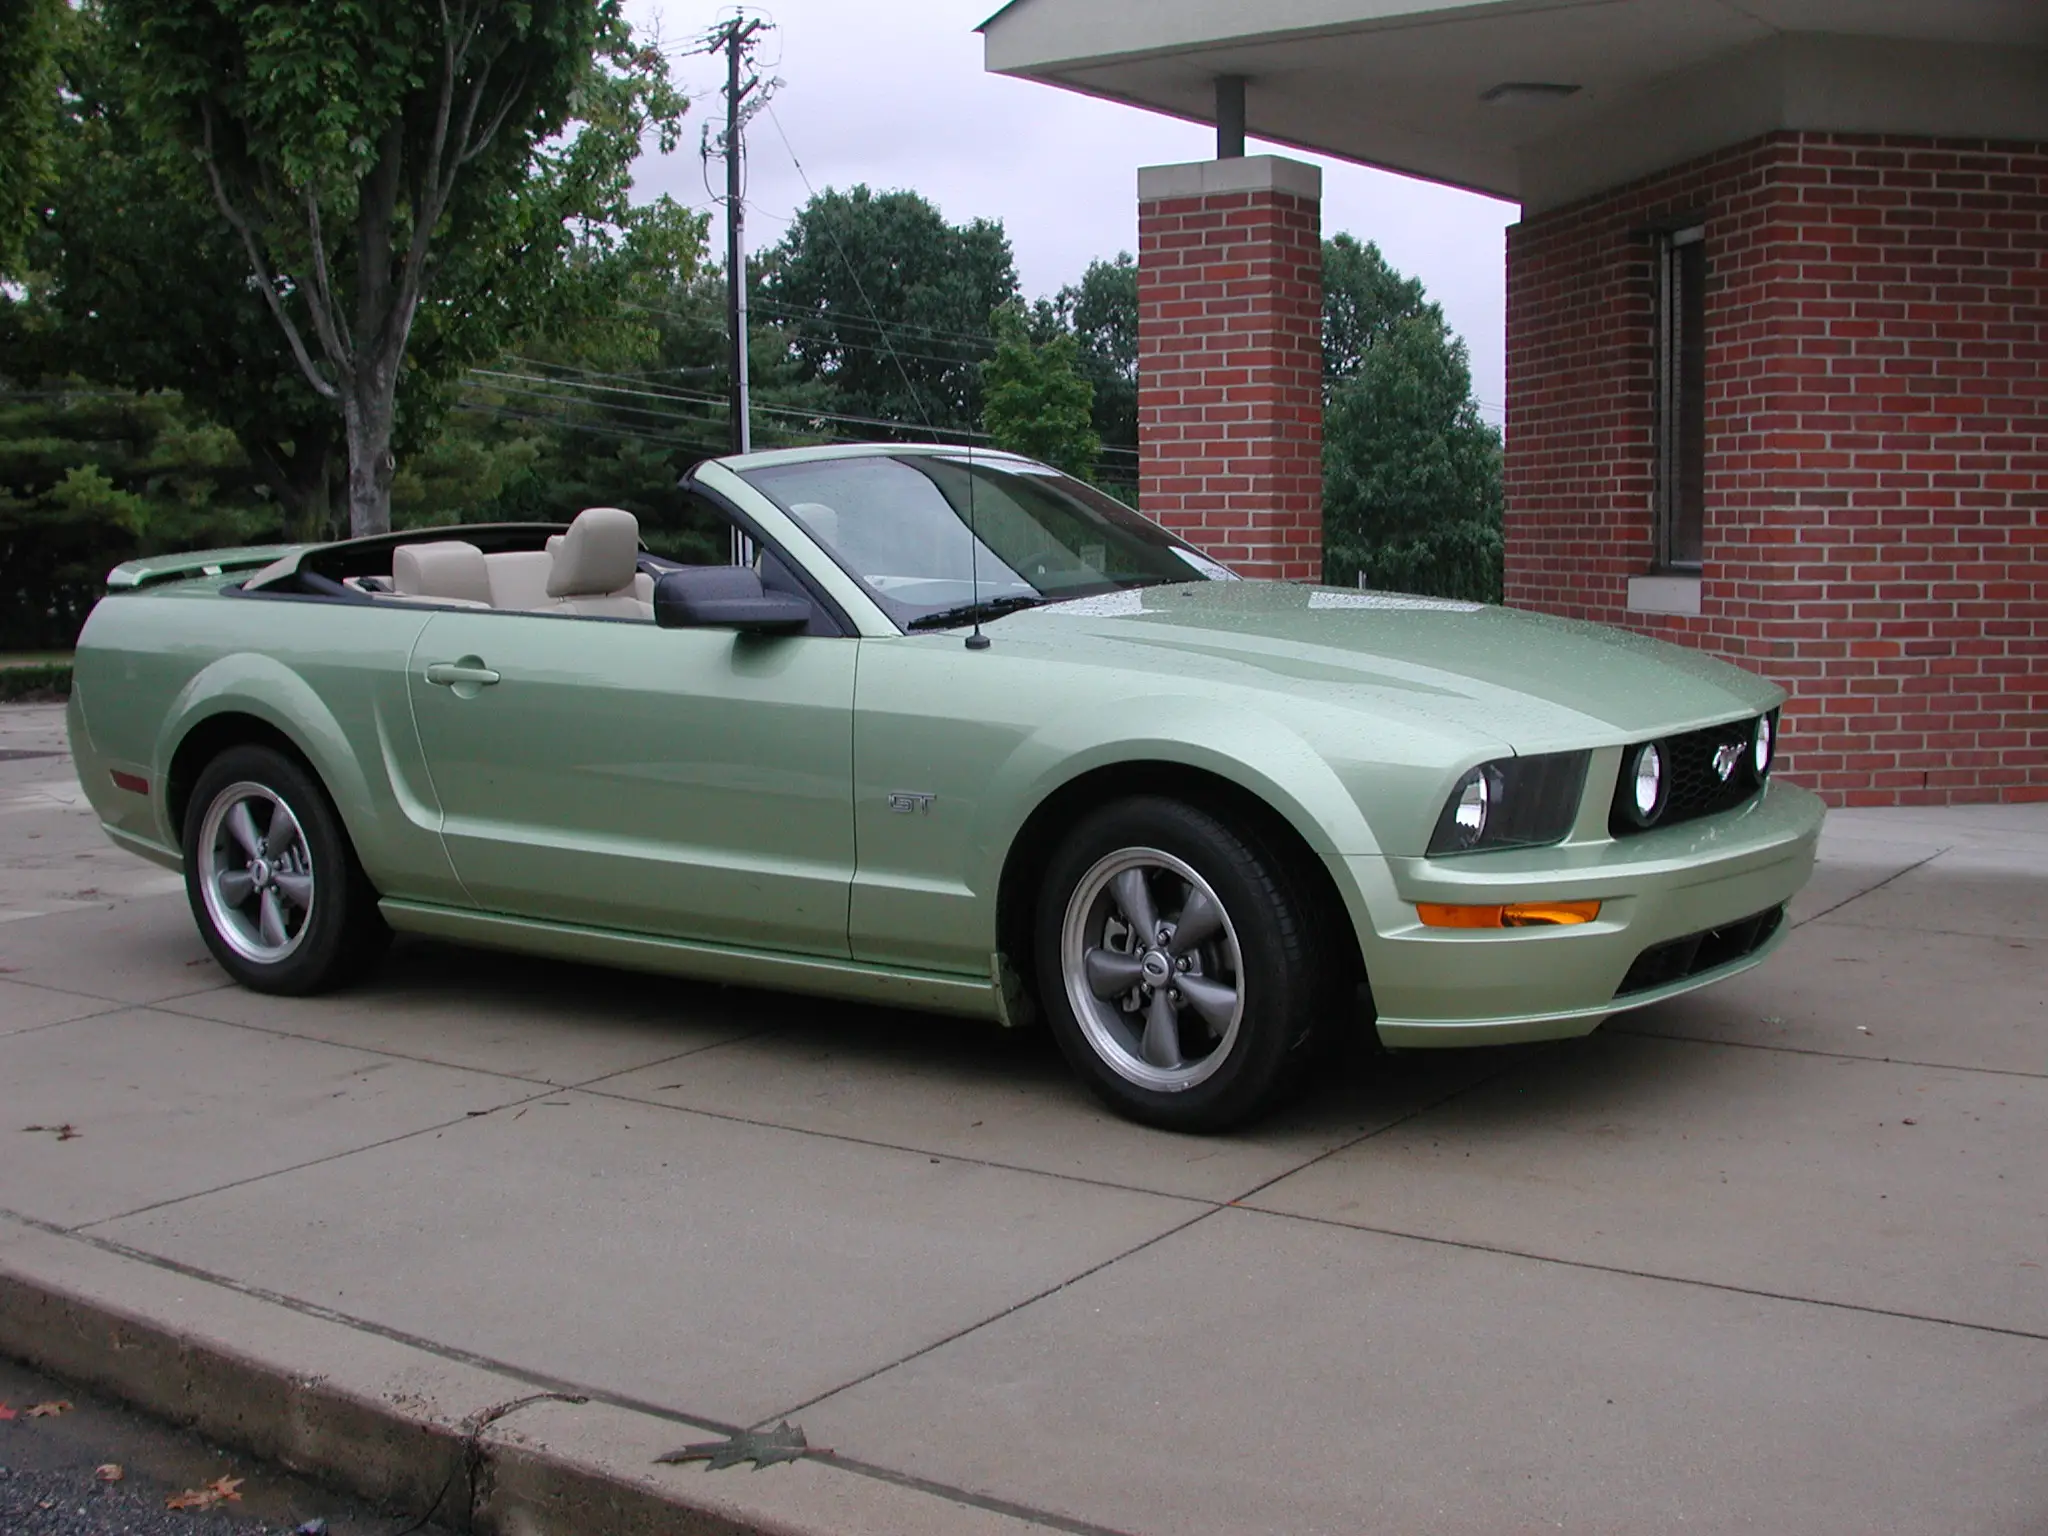 2006 Ford Mustang GT Convertible Review